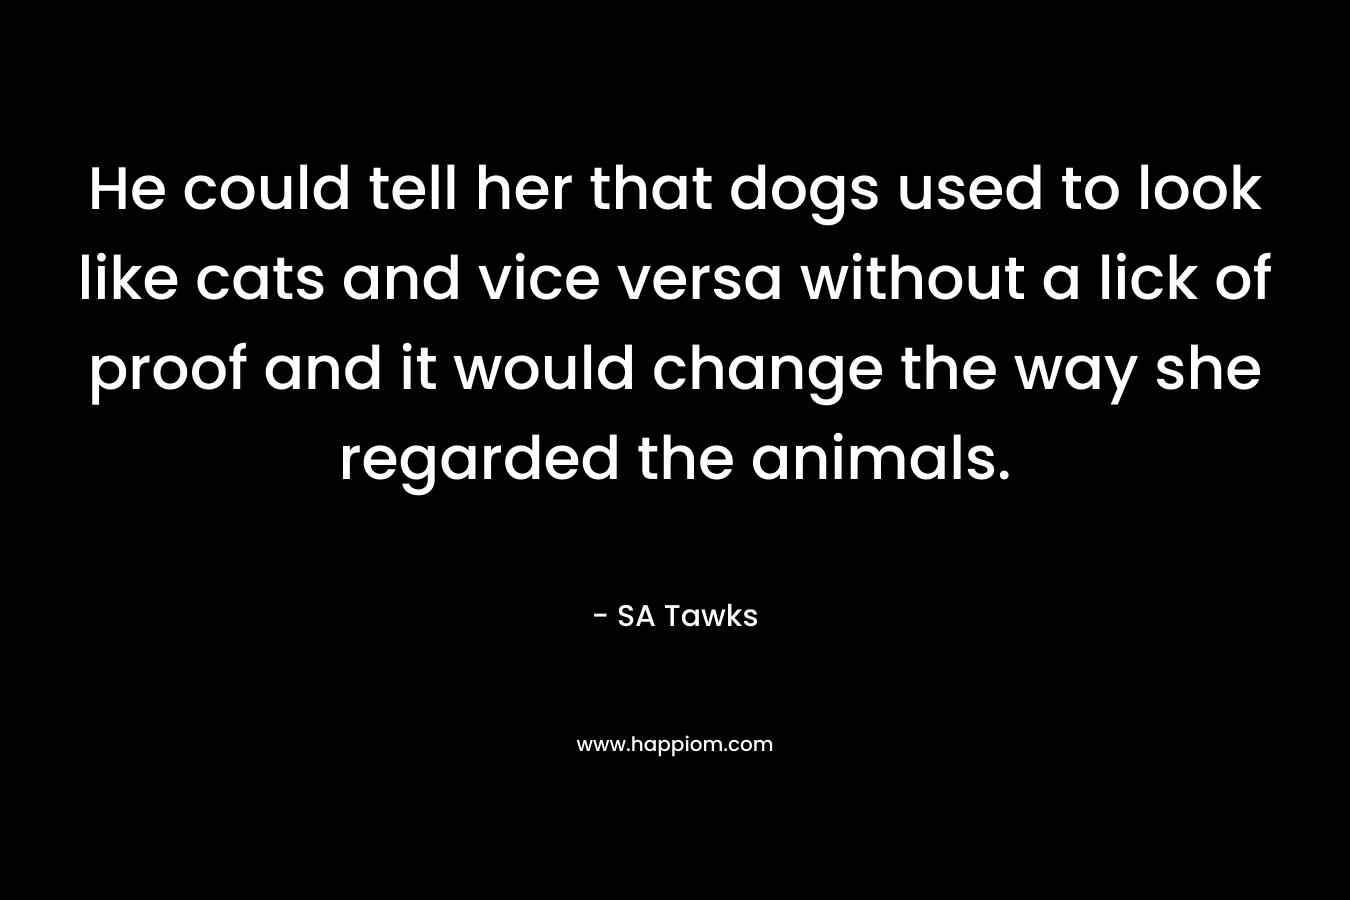 He could tell her that dogs used to look like cats and vice versa without a lick of proof and it would change the way she regarded the animals.